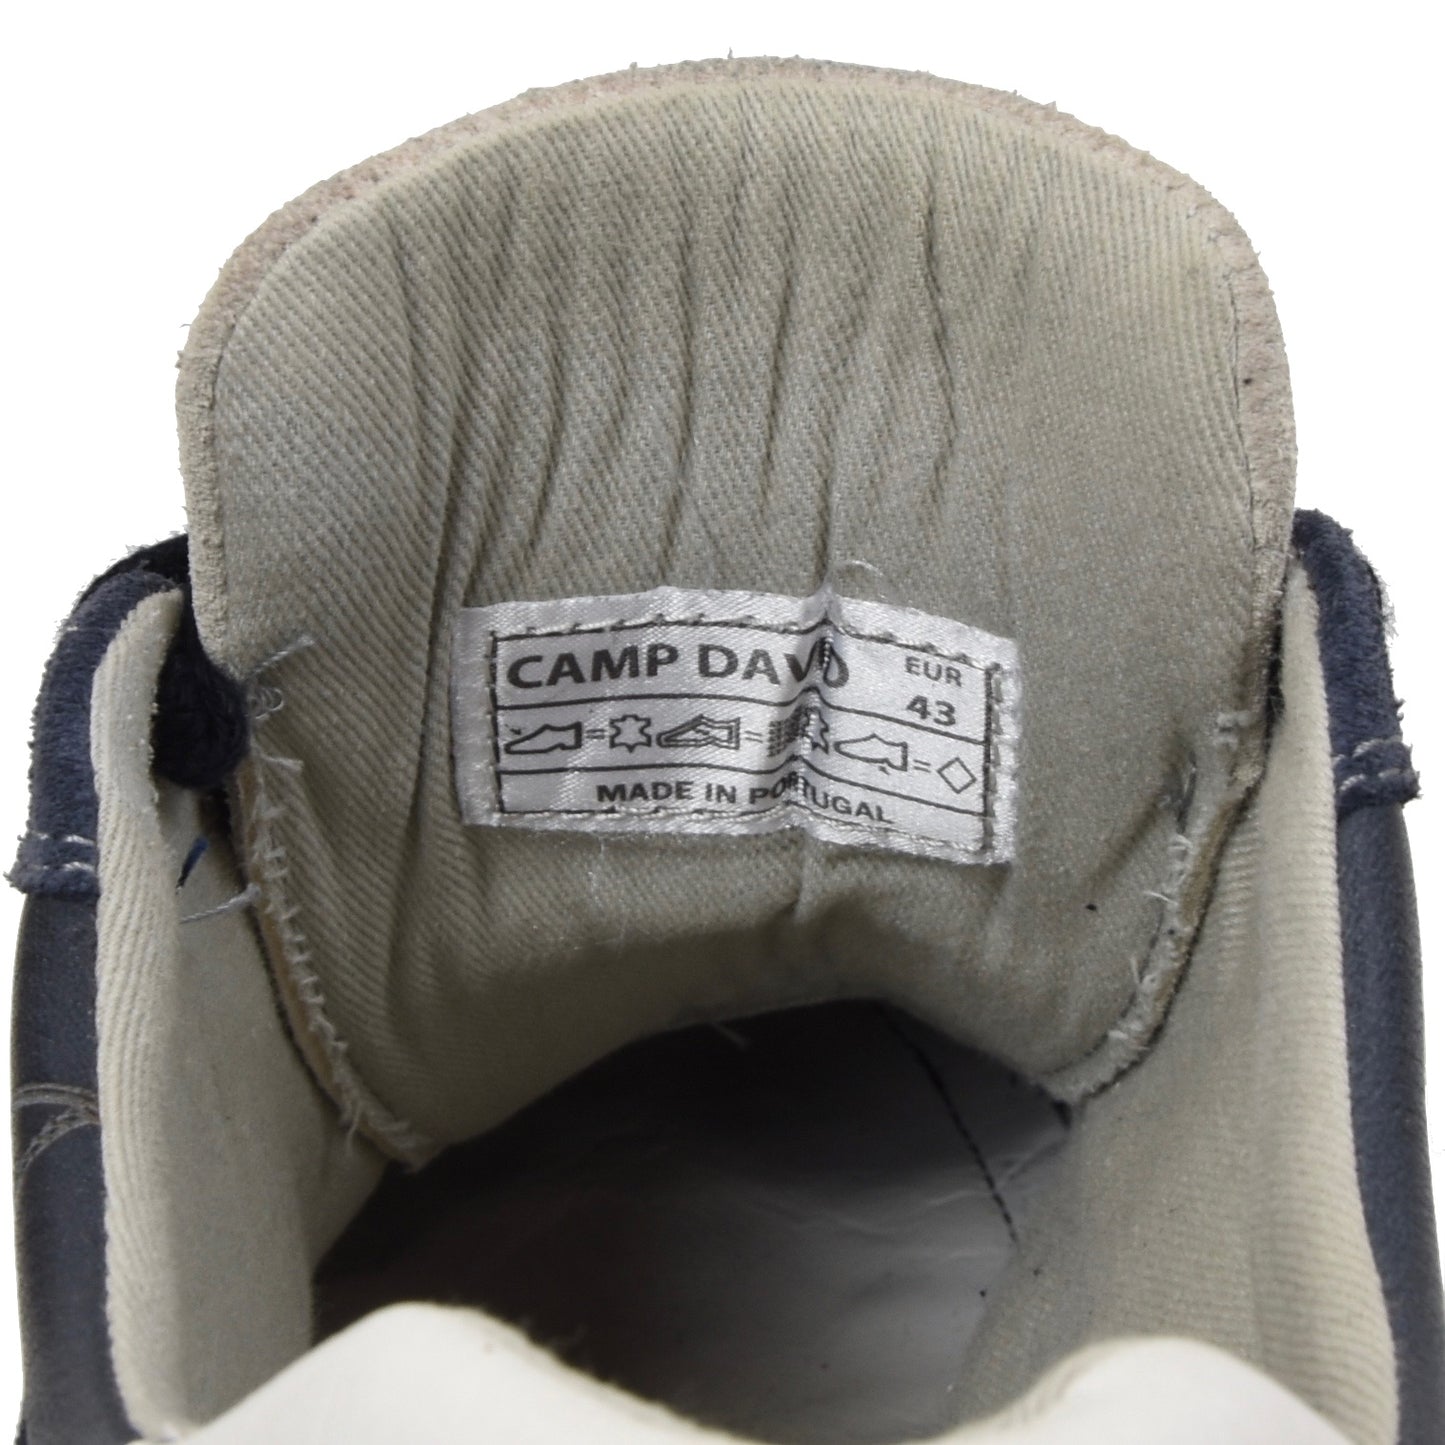 Camp David Leather Sneakers Size 43